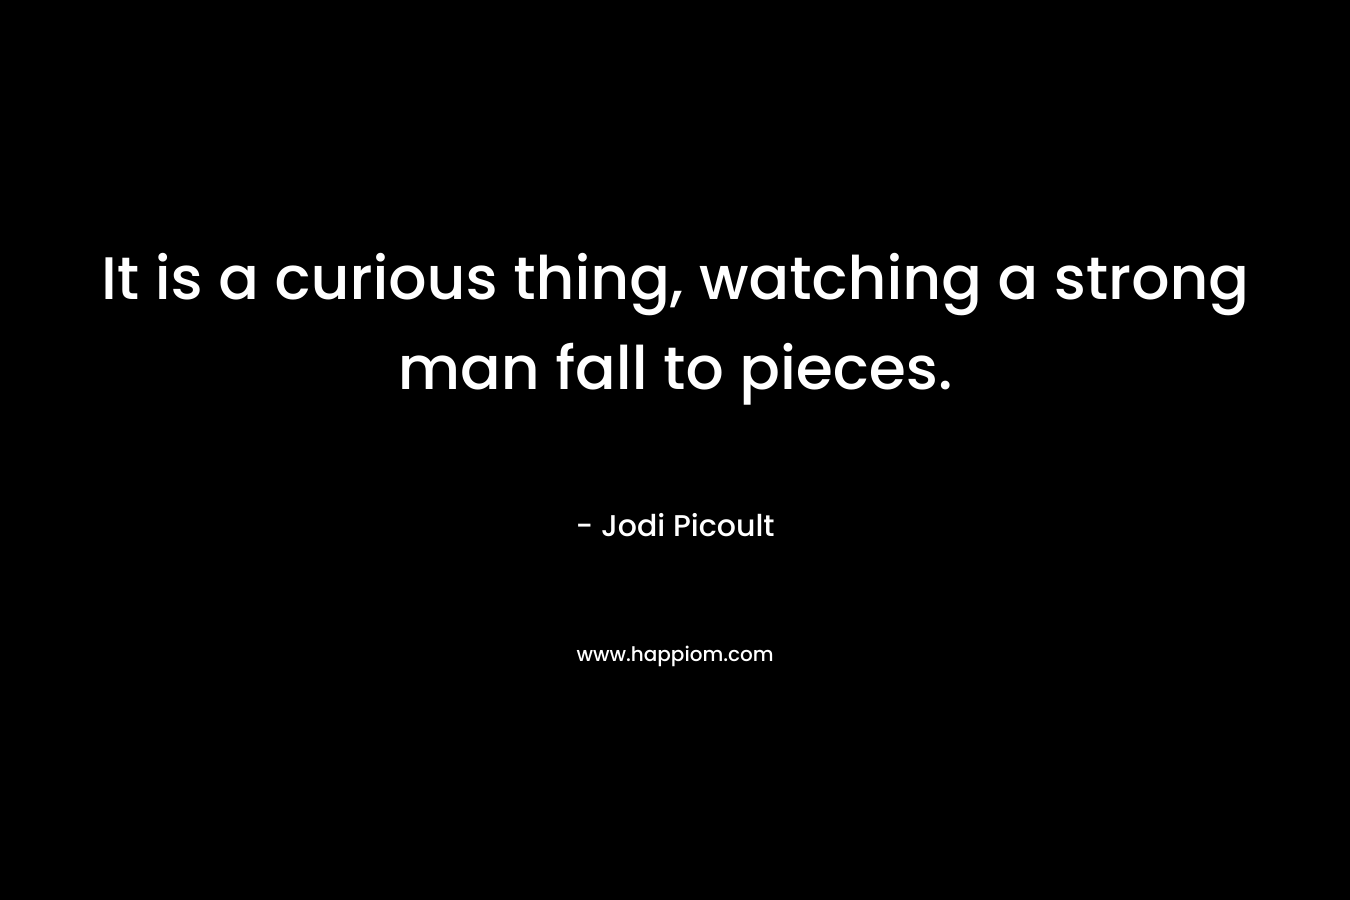 It is a curious thing, watching a strong man fall to pieces.